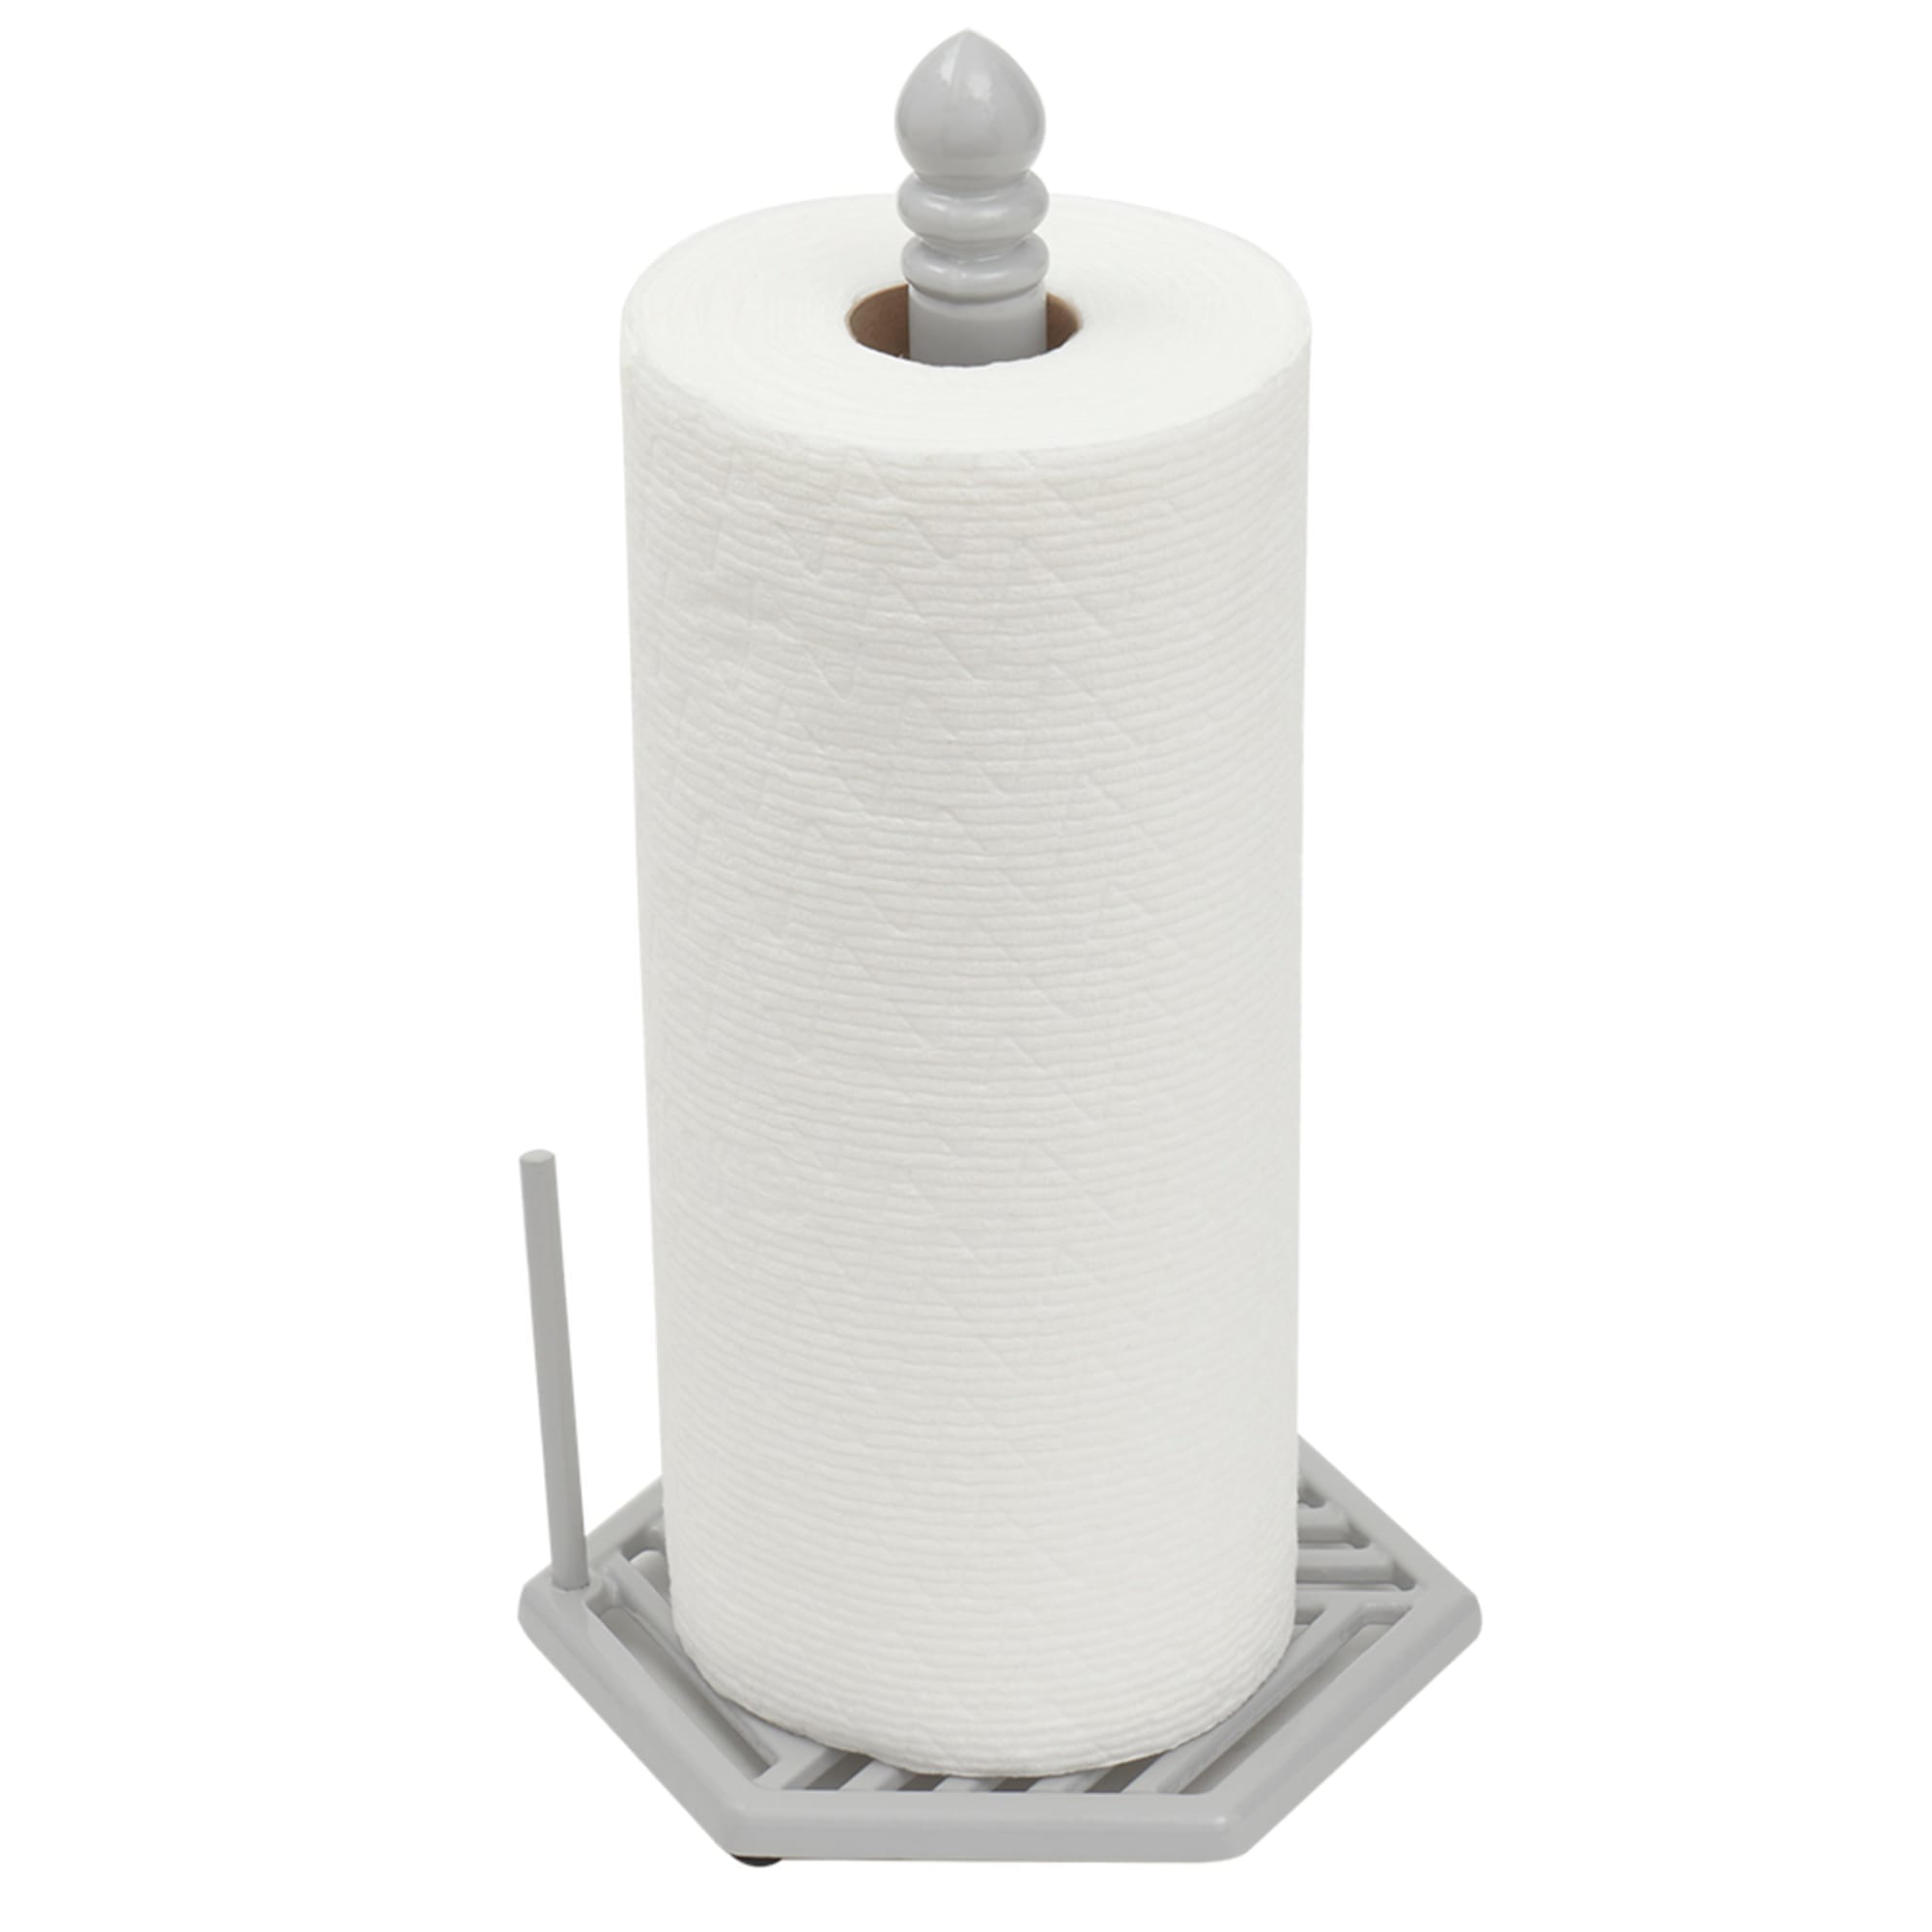 Home Basics Lines Freestanding Cast Iron Paper Towel Holder with Dispensing Side Bar, Grey $10.00 EACH, CASE PACK OF 3